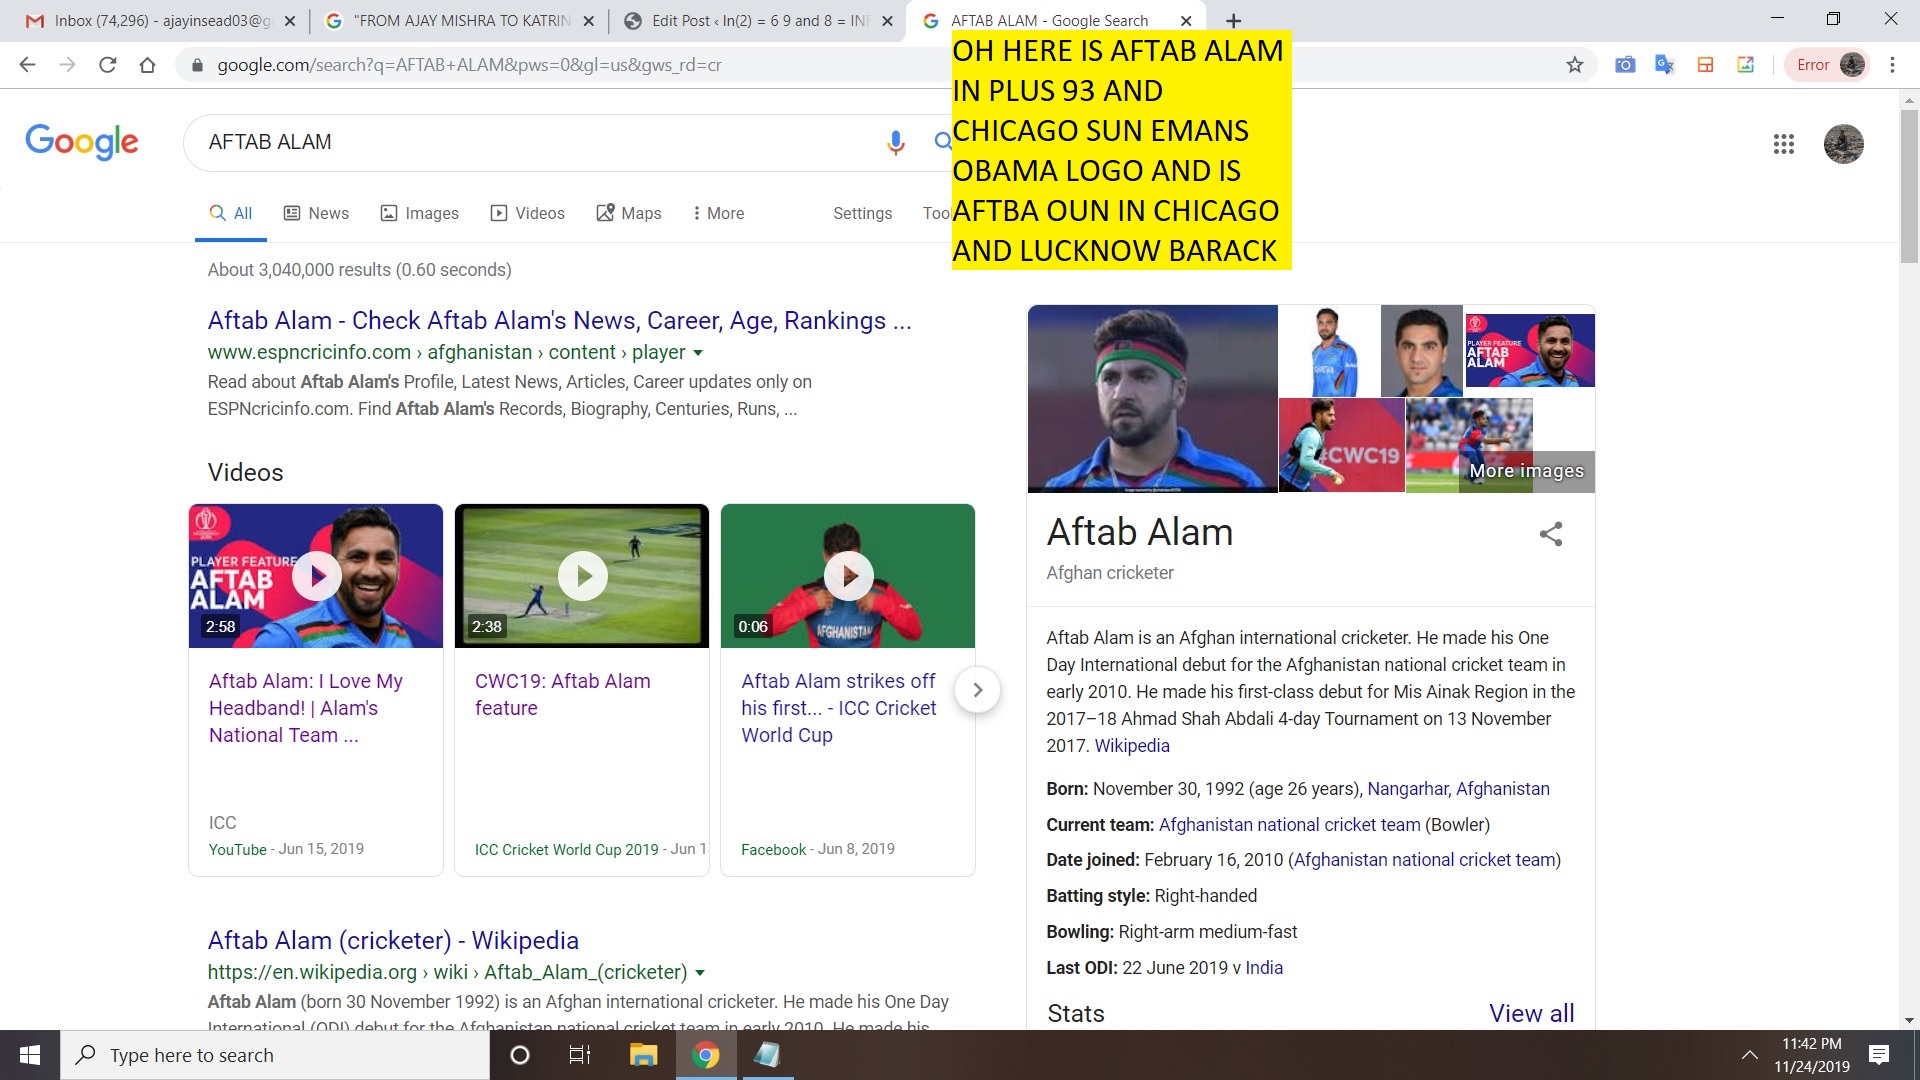 OH HERE IS AFTAB ALAM IN PLUS 93 AND CHICAGO SUN EMANS OBAMA LOGO AND IS AFTBA OUN IN CHICAGO AND LUCKNOW BARACK